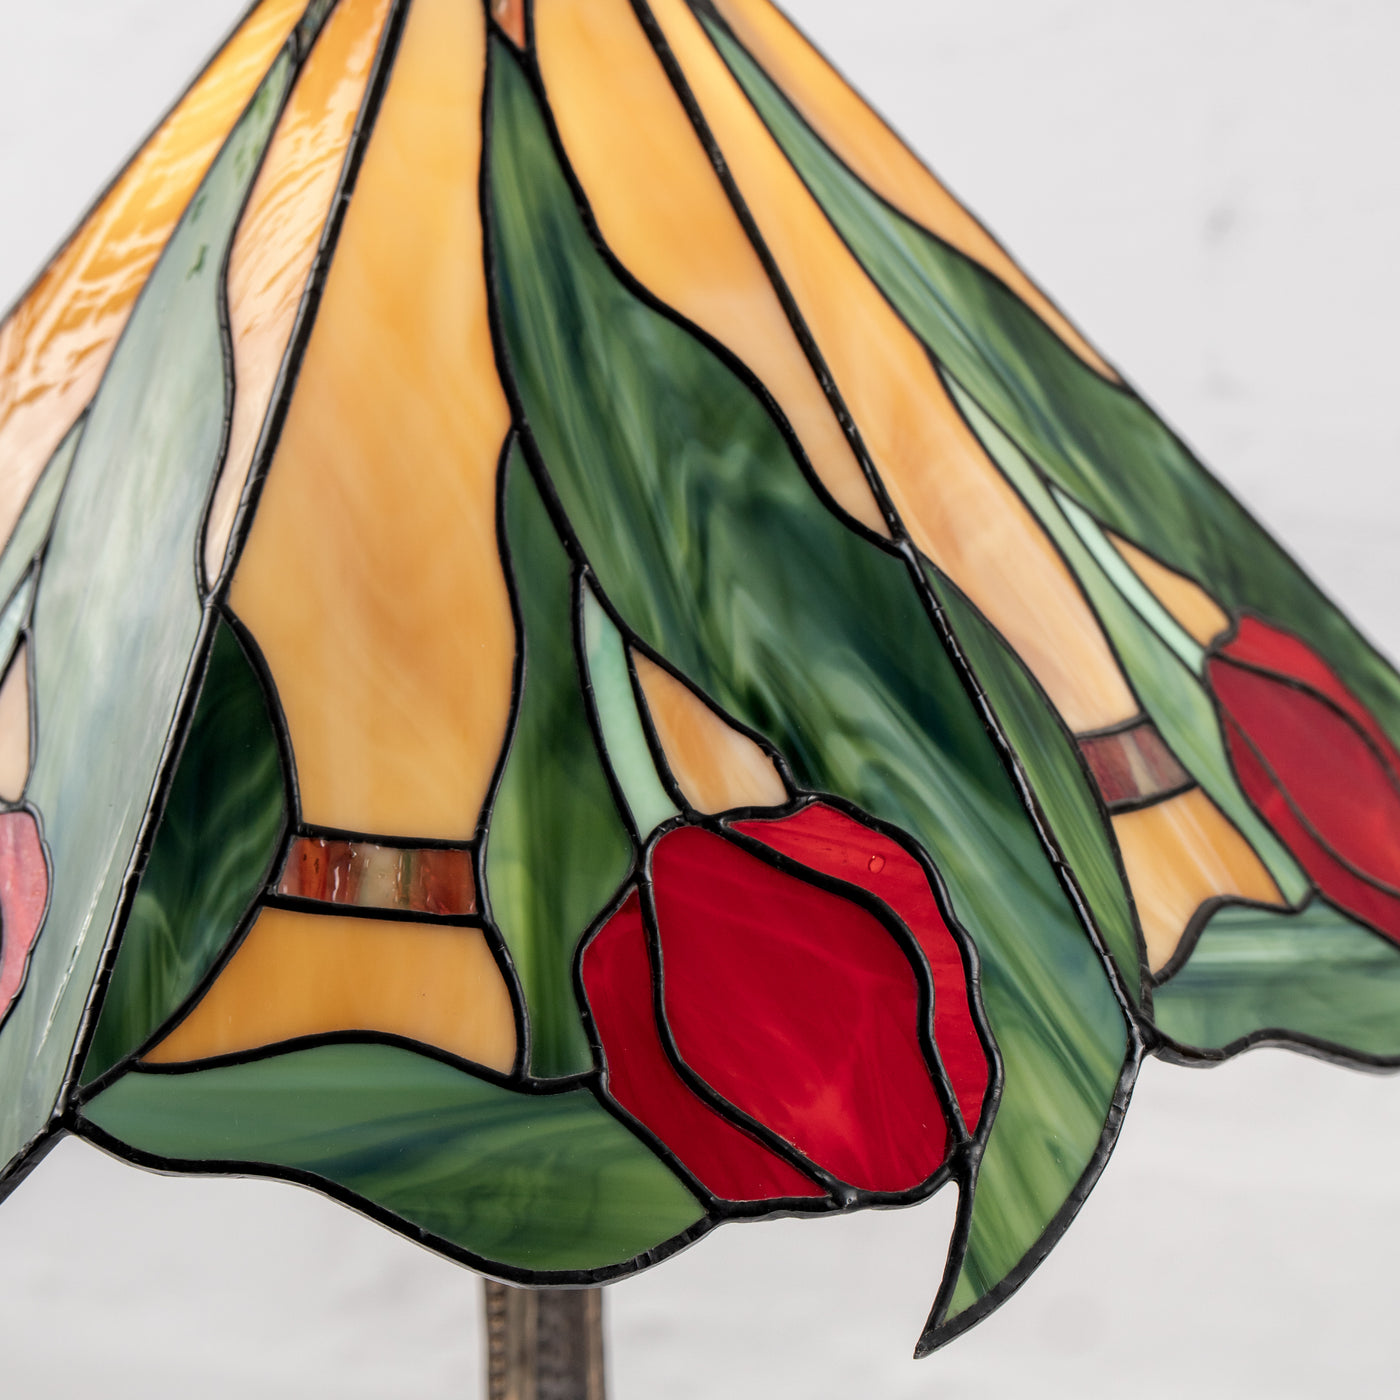 red tulips stained glass lamp